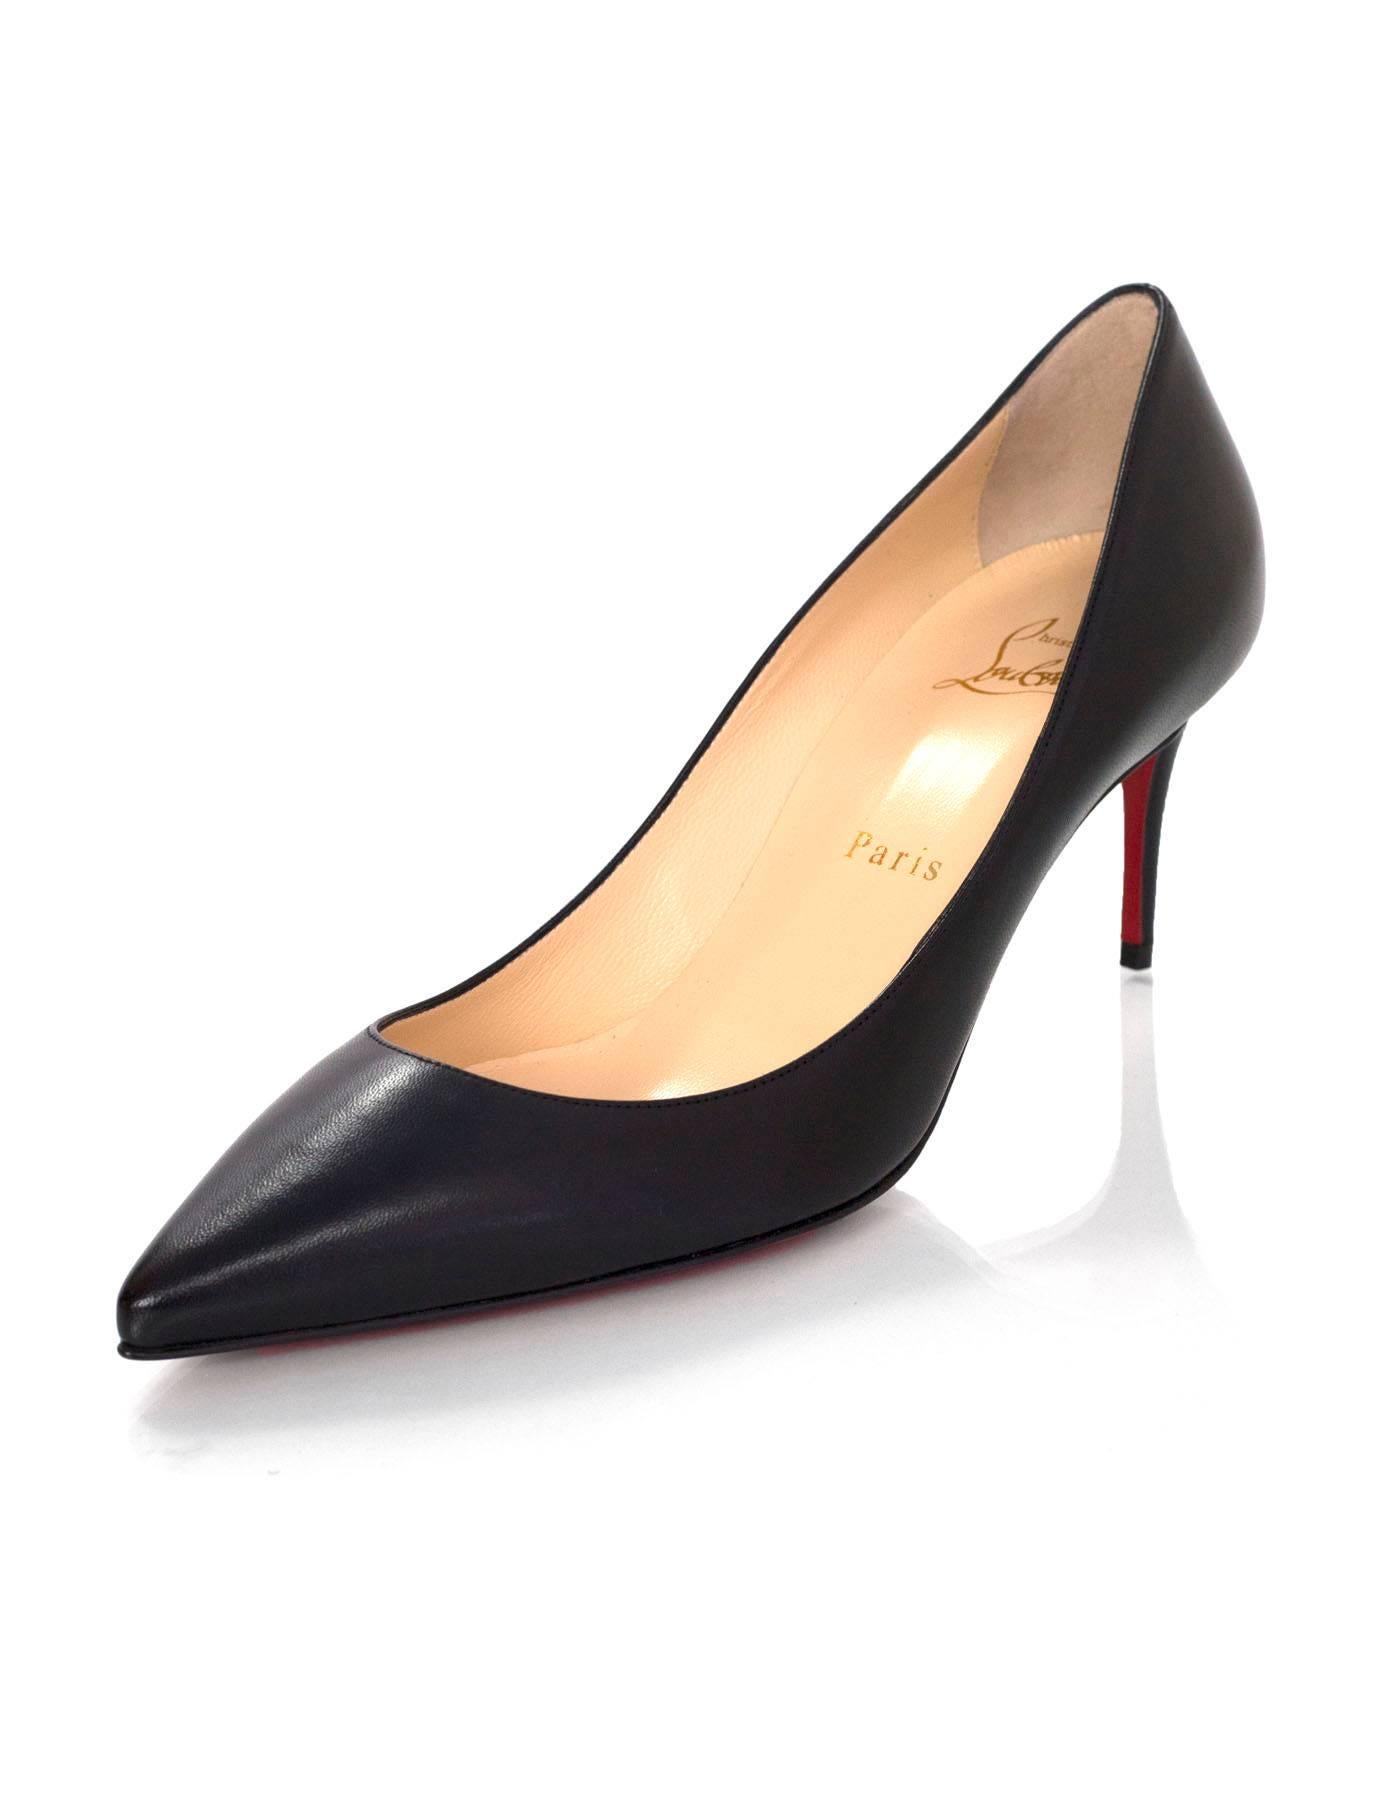 Christian Louboutin NEW Black Decollete Pumps 

Made In: Italy
Color: Black
Materials: Leather
Closure/Opening: None
Sole Stamp: Christian Louboutin Made in Italy 37 1/2
Overall Condition: Excellent
Includes: Christian Louboutin box, dust bag, 1 set